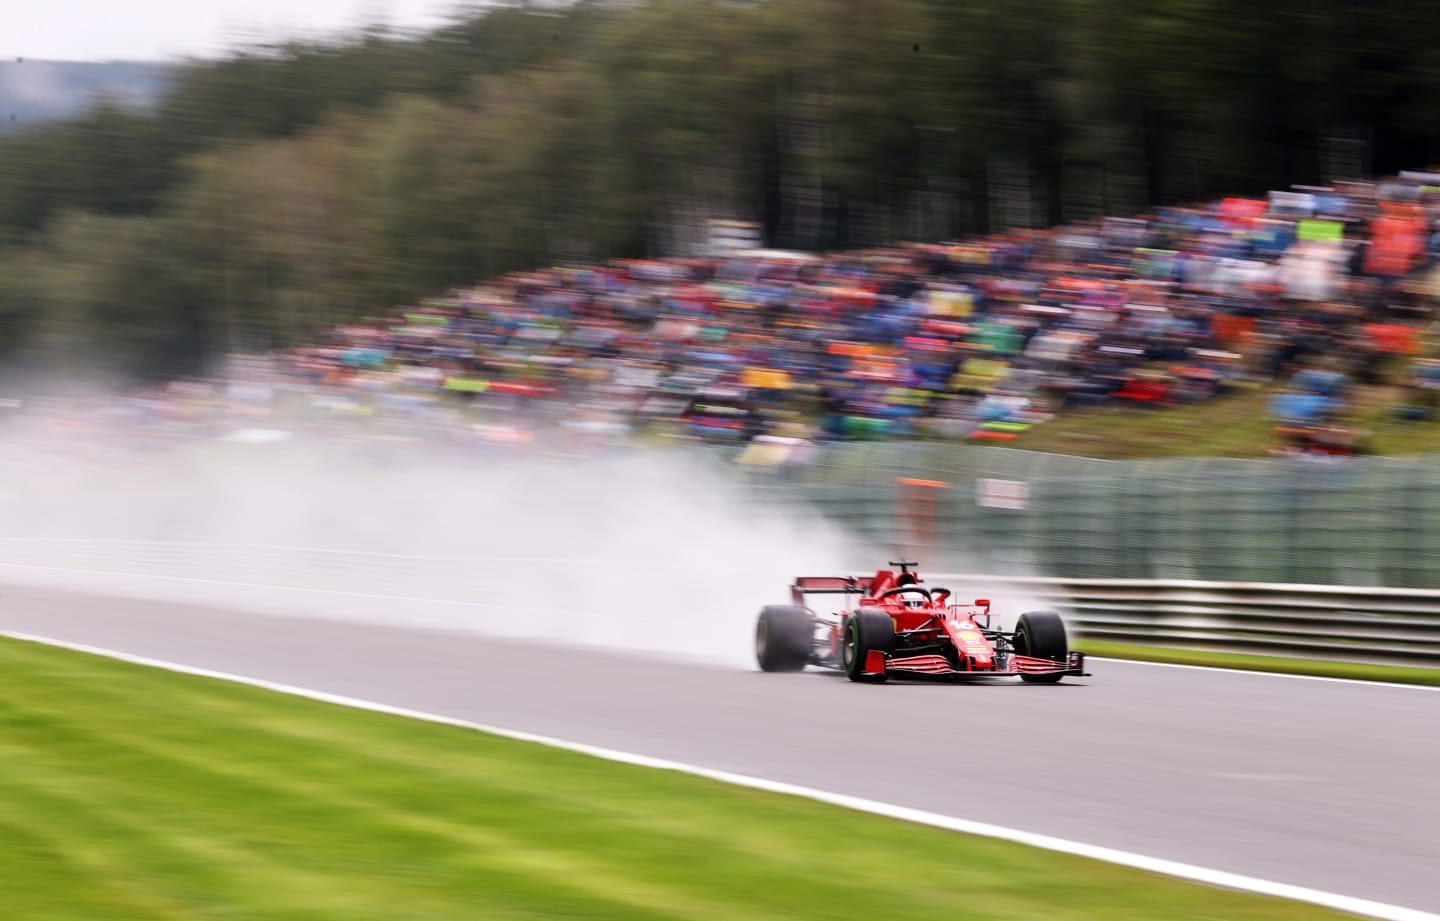 SPA, BELGIUM - AUGUST 28: Charles Leclerc of Monaco driving the (16) Scuderia Ferrari SF21 during final practice ahead of the F1 Grand Prix of Belgium at Circuit de Spa-Francorchamps on August 28, 2021 in Spa, Belgium. (Photo by Lars Baron/Getty Images)